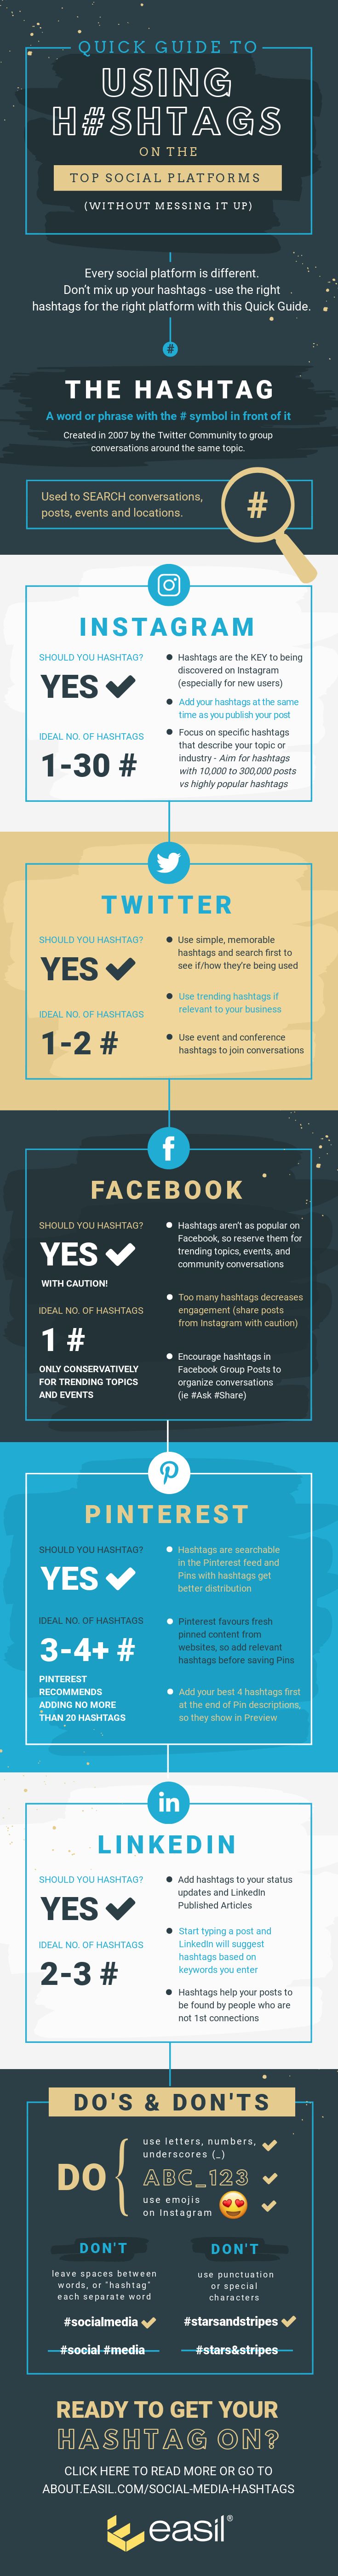 Hashtag Infographic - How to use the Best Social Media Hashtags on Every Platform (and not mess it up)